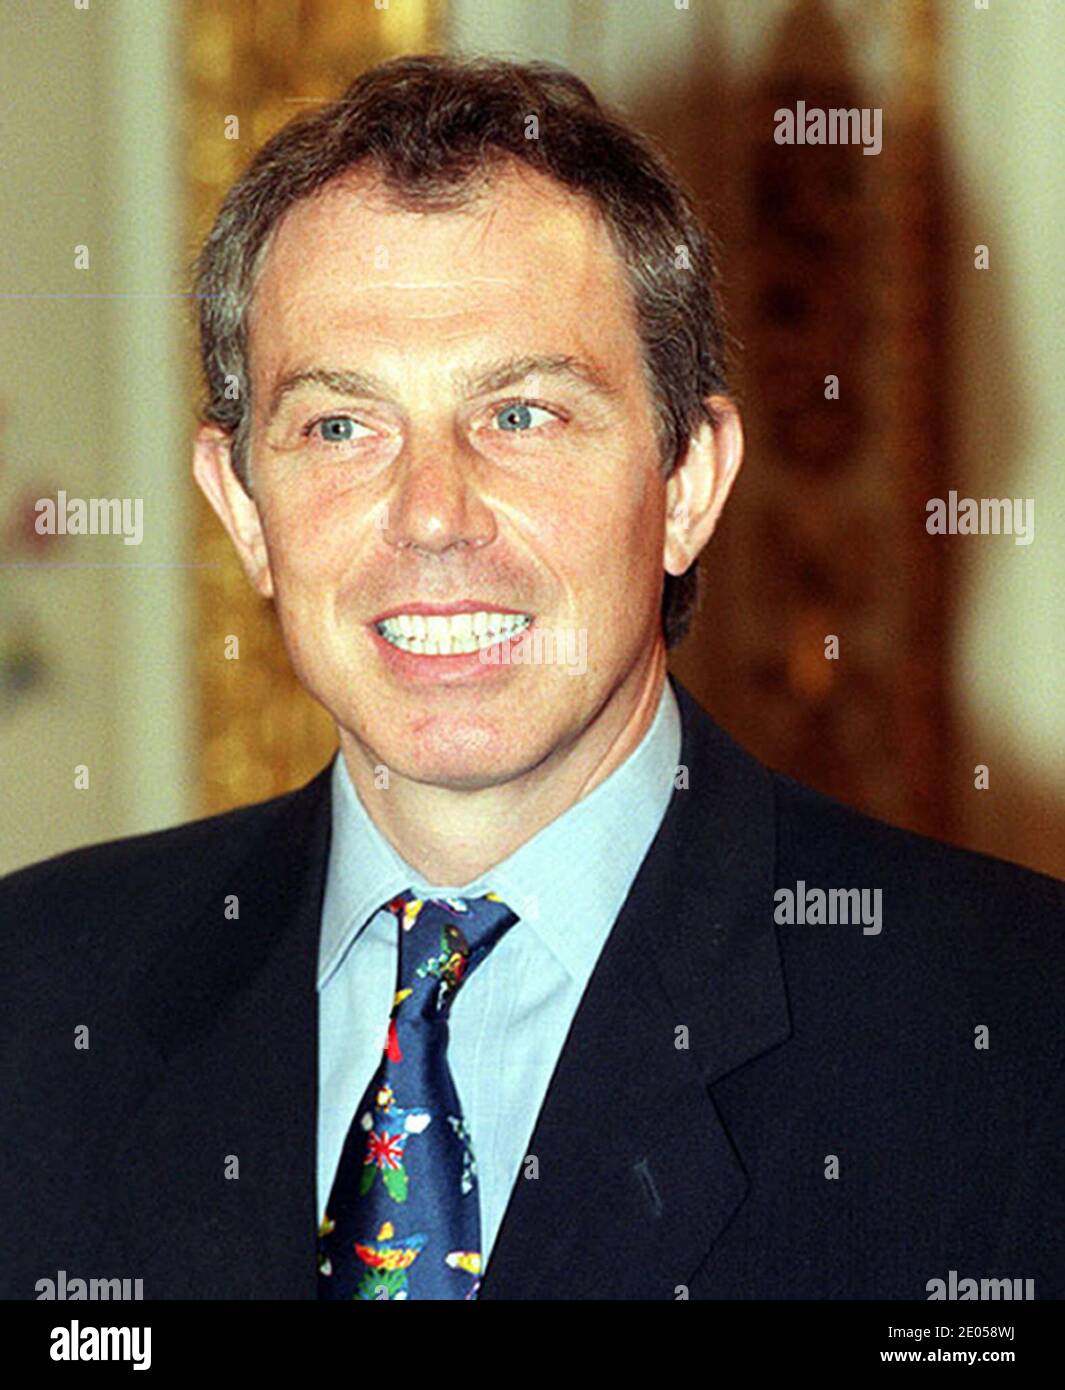 File photo dated 8/1/1998 of Tony Blair who appeared to heed an early warning from the Treasury not to 'fritter' away the budget on 'piecemeal initiatives'. A slideshow prepared for the new Labour Prime Minister in October 1997 by Alistair Darling, Chief Secretary to the Treasury and future Chancellor of the Exchequer, urged caution. Stock Photo